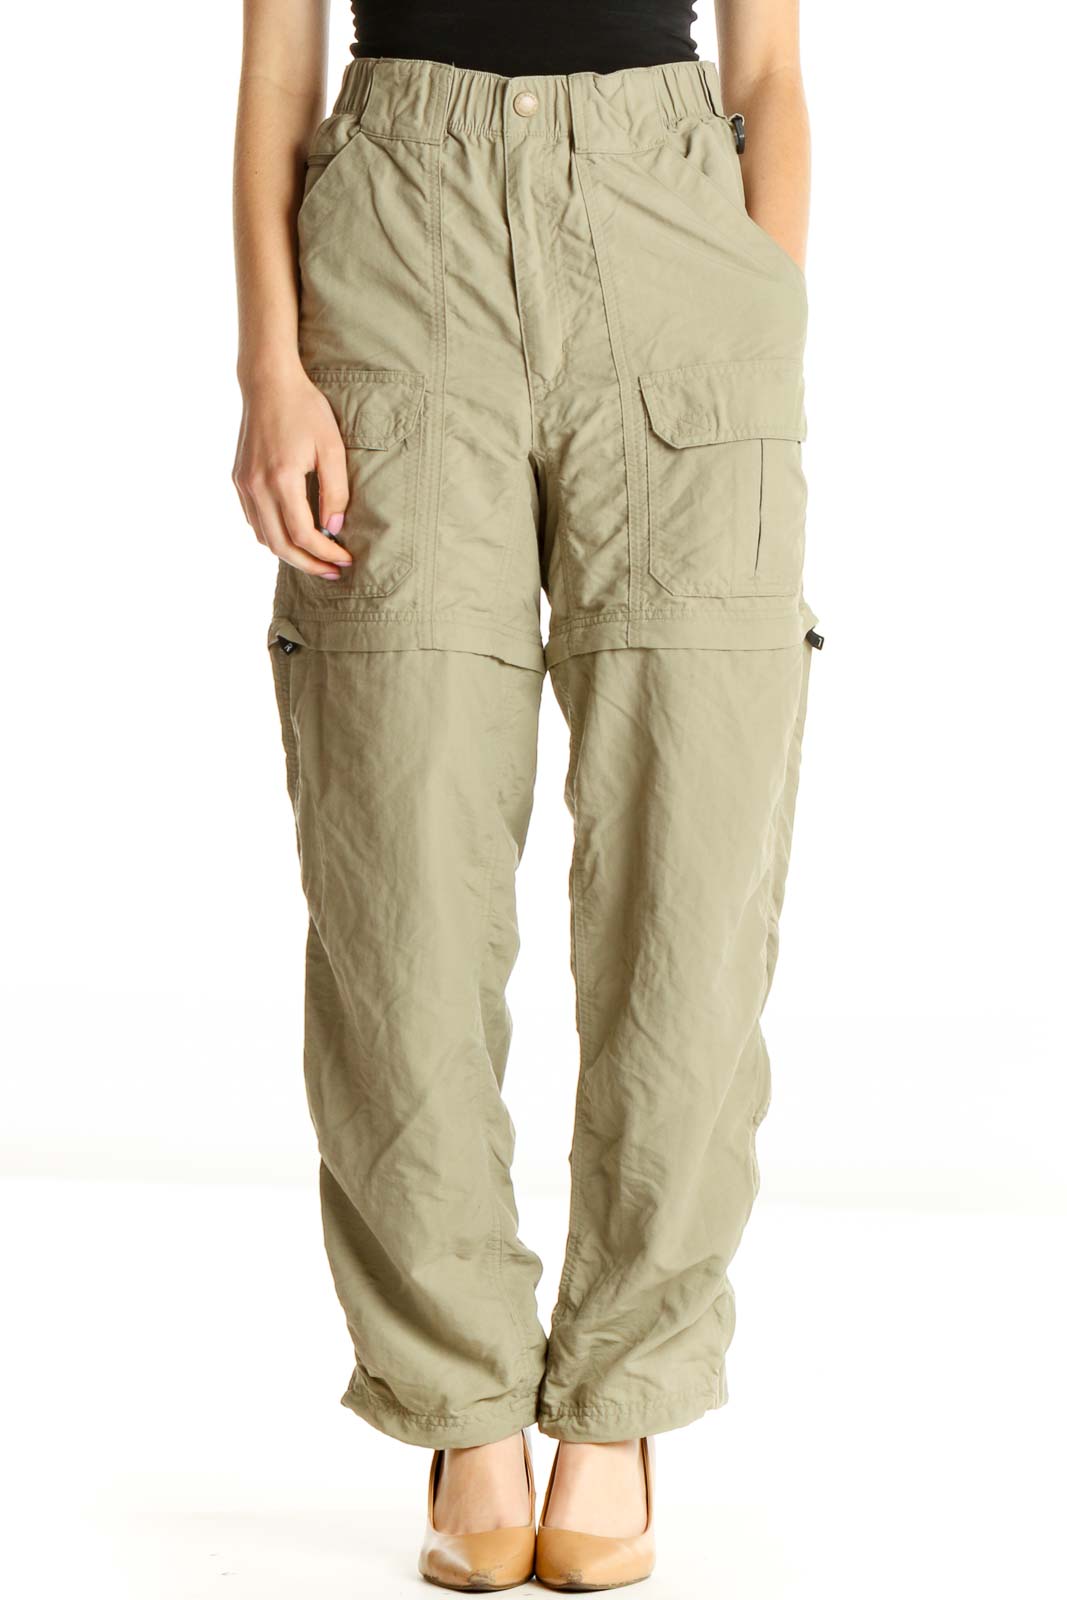 Green Solid All Day Wear Cargos Pants Front